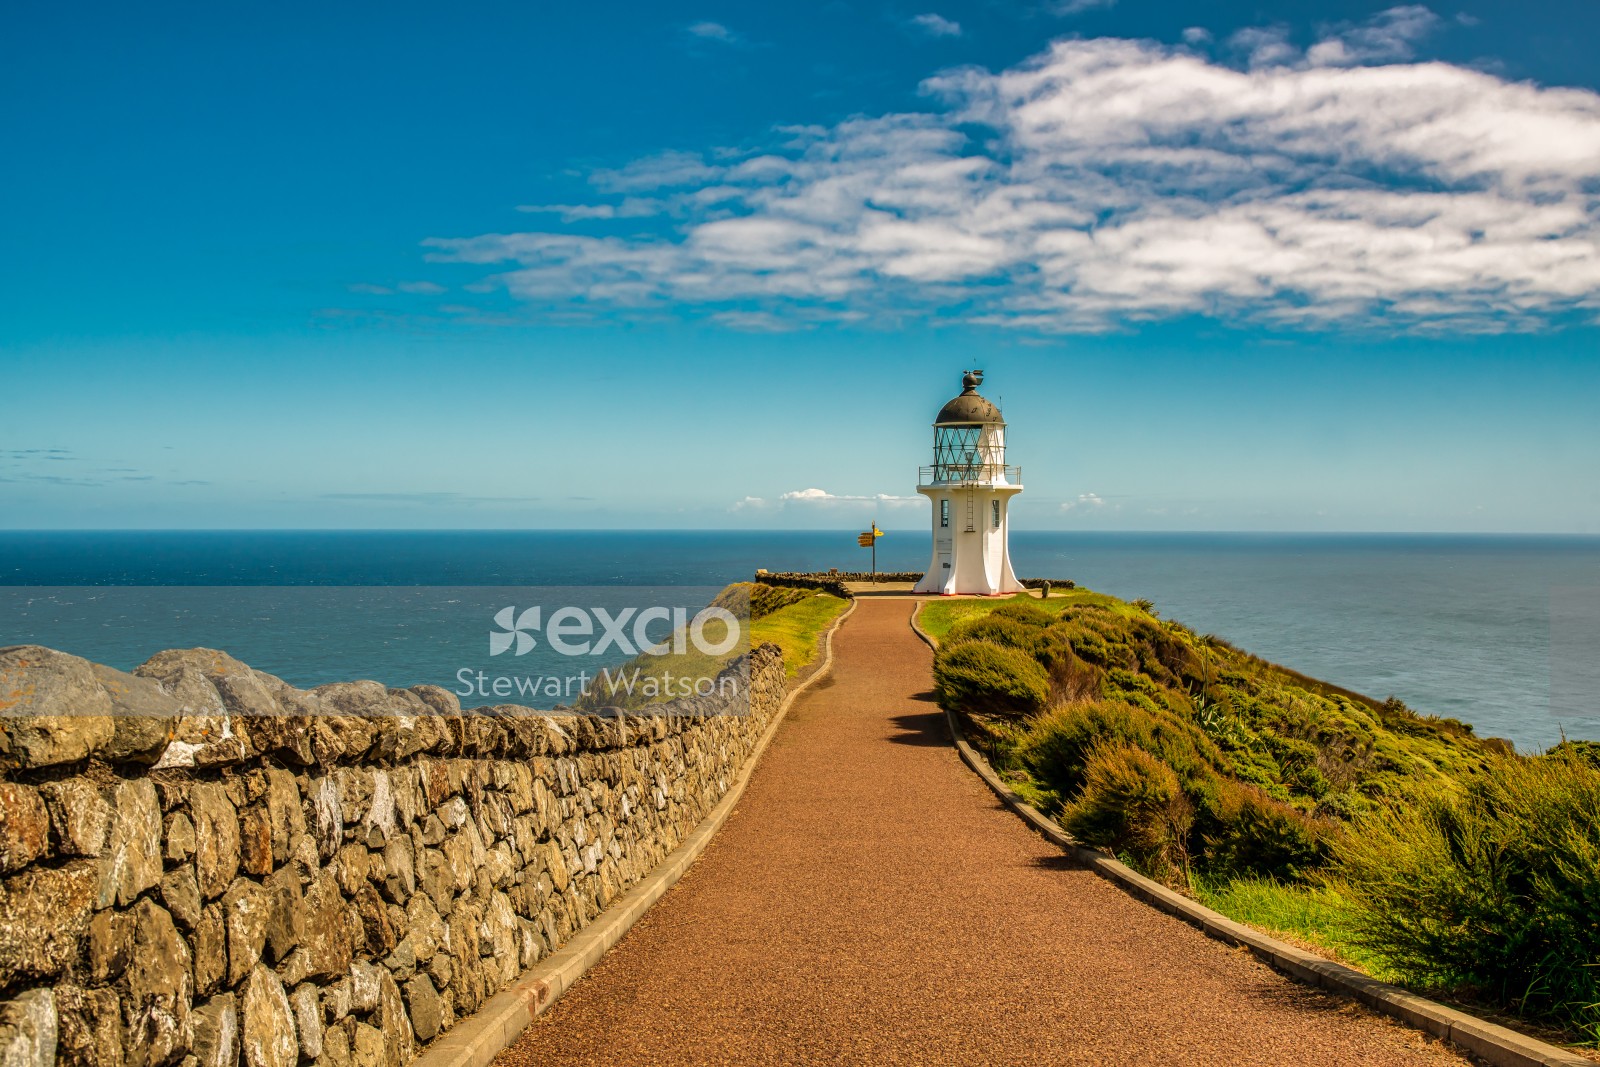 Pathway leading to the Cape Reinga lighthouse